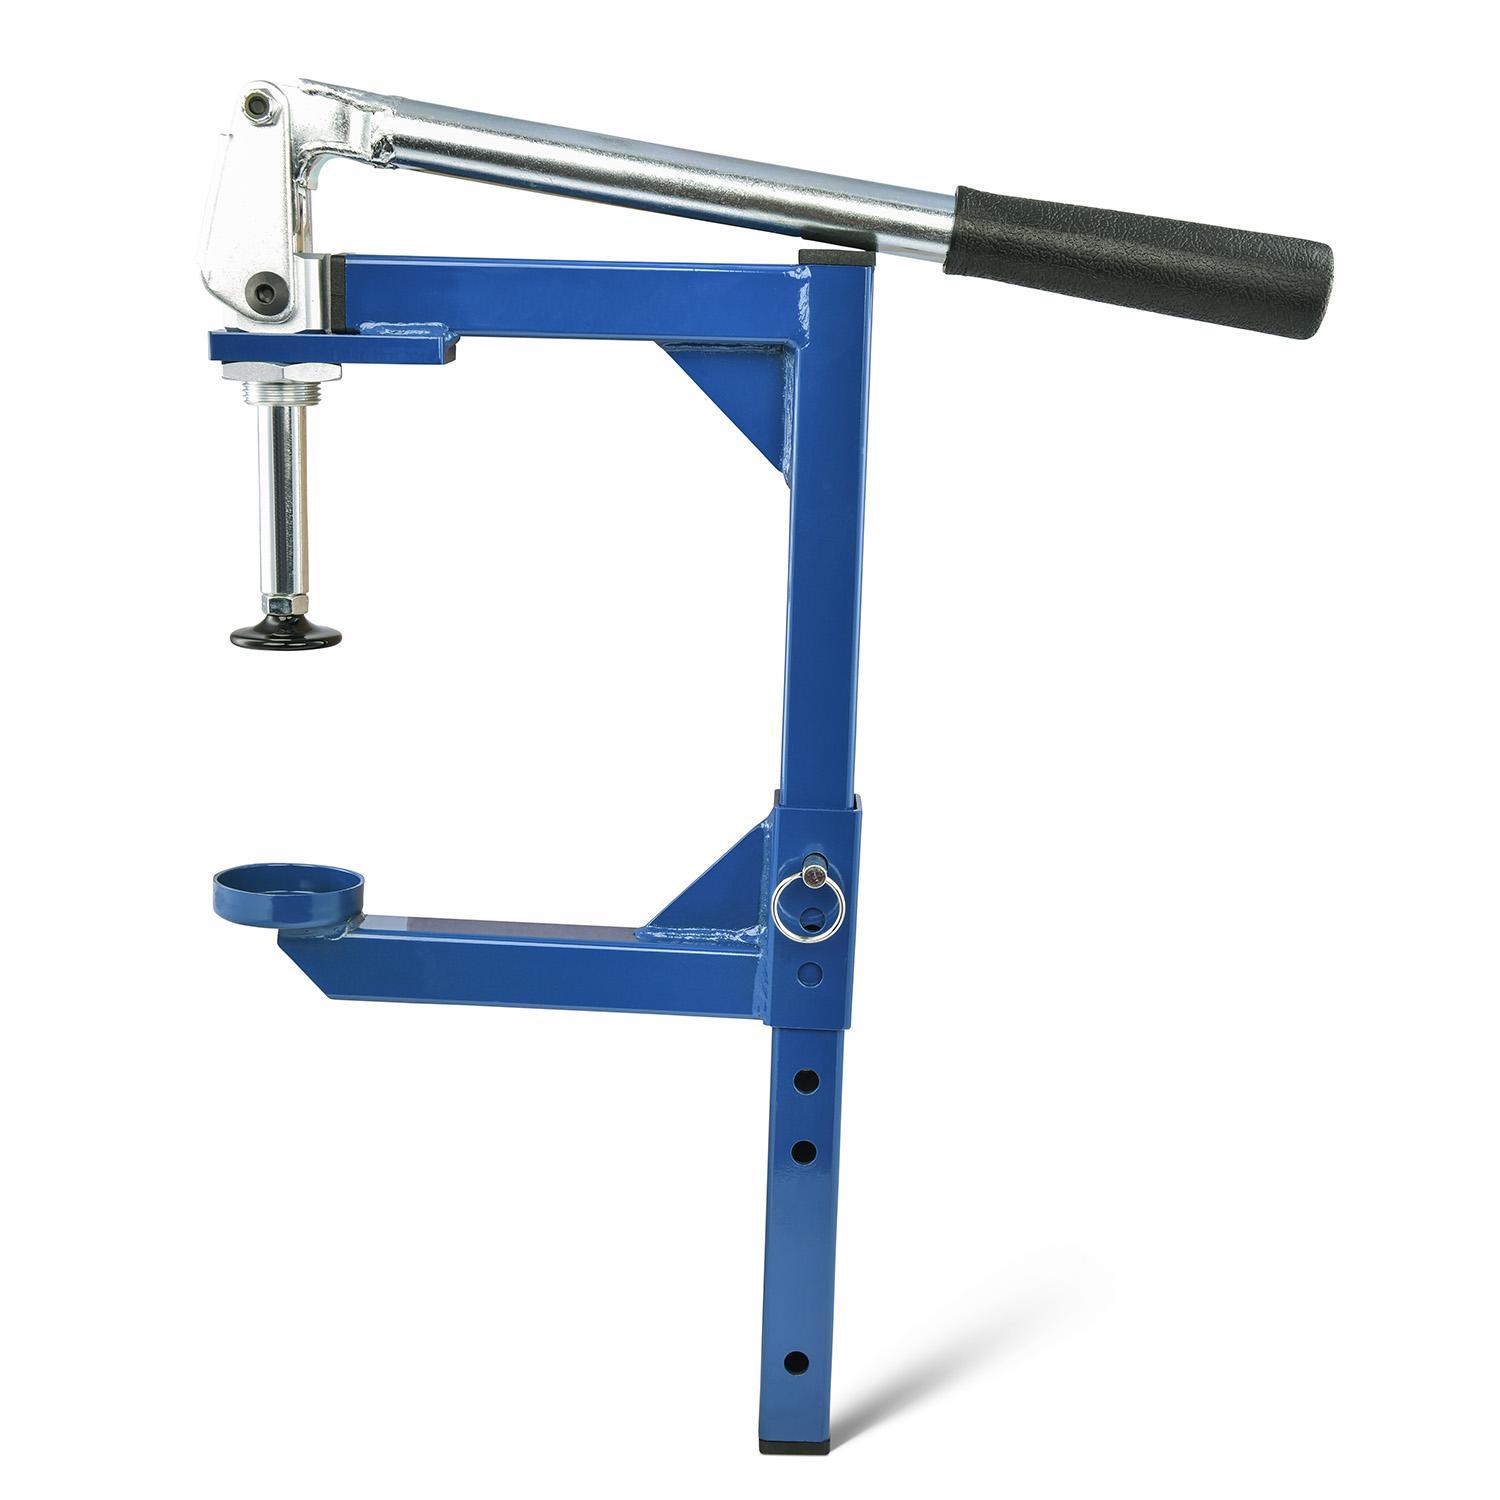 Made From Quality Steel and has a Blue Powdercoat Finish - 66832